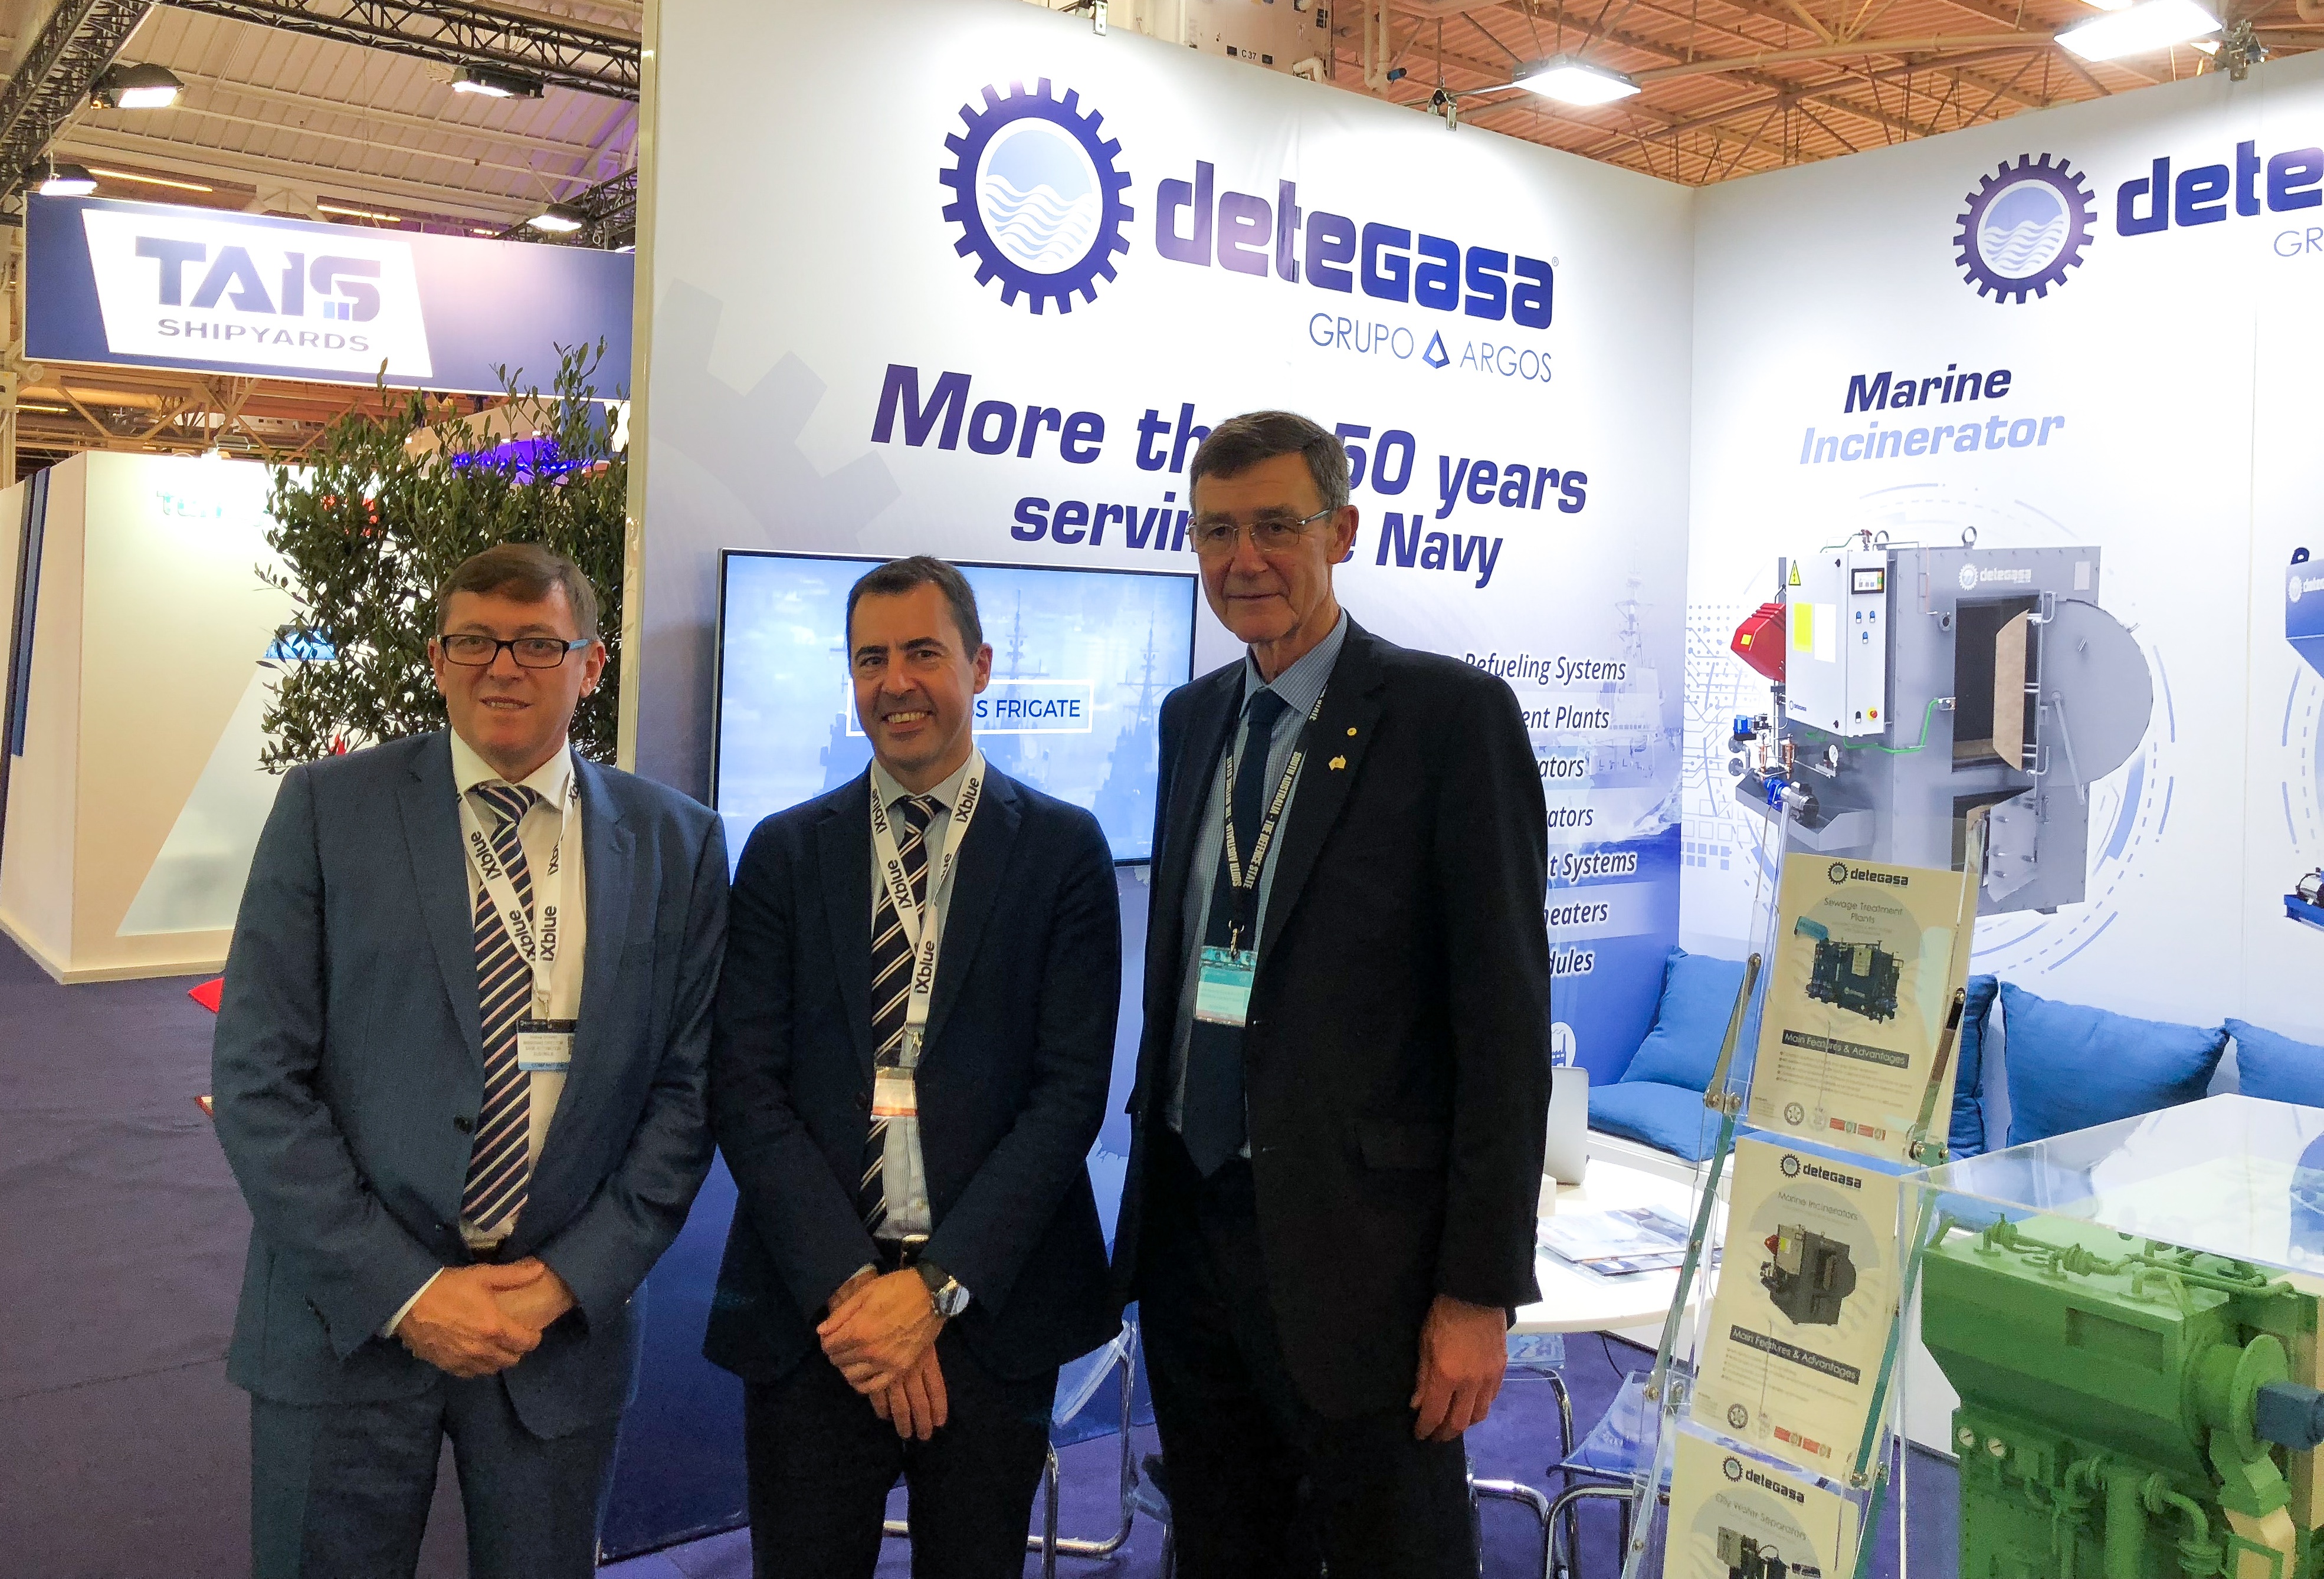 SAGE Automation in the spotlight at Euronaval, after signing major partnership agreement with Detegasa